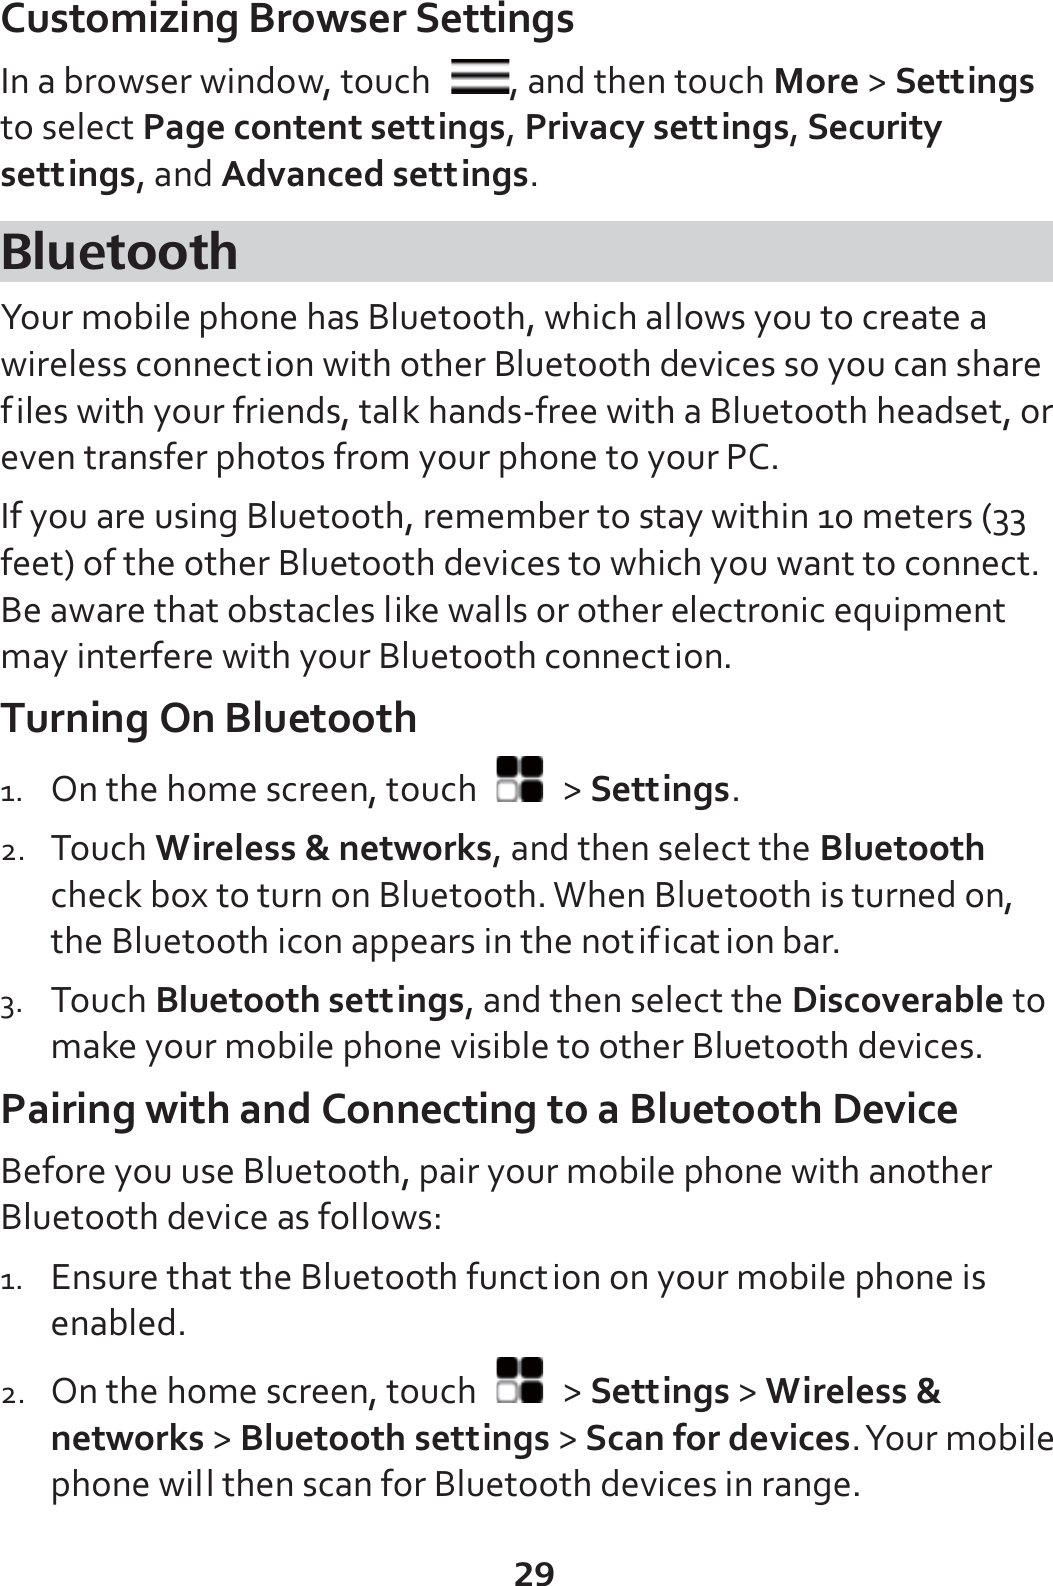 29 Customizing Browser Settings In a browser window, touch  , and then touch More &gt; Settings to select Page content settings, Privacy settings, Security settings, and Advanced settings. Bluetooth Your mobile phone has Bluetooth, which allows you to create a wireless connection with other Bluetooth devices so you can share files with your friends, talk hands-free with a Bluetooth headset, or even transfer photos from your phone to your PC. If you are using Bluetooth, remember to stay within 10 meters (33 feet) of the other Bluetooth devices to which you want to connect. Be aware that obstacles like walls or other electronic equipment may interfere with your Bluetooth connection. Turning On Bluetooth 1. On the home screen, touch   &gt; Settings. 2. Touch Wireless &amp; networks, and then select the Bluetooth check box to turn on Bluetooth. When Bluetooth is turned on, the Bluetooth icon appears in the notification bar. 3. Touch Bluetooth settings, and then select the Discoverable to make your mobile phone visible to other Bluetooth devices. Pairing with and Connecting to a Bluetooth Device Before you use Bluetooth, pair your mobile phone with another Bluetooth device as follows: 1. Ensure that the Bluetooth function on your mobile phone is enabled. 2. On the home screen, touch   &gt; Settings &gt; Wireless &amp; networks &gt; Bluetooth settings &gt; Scan for devices. Your mobile phone will then scan for Bluetooth devices in range. 